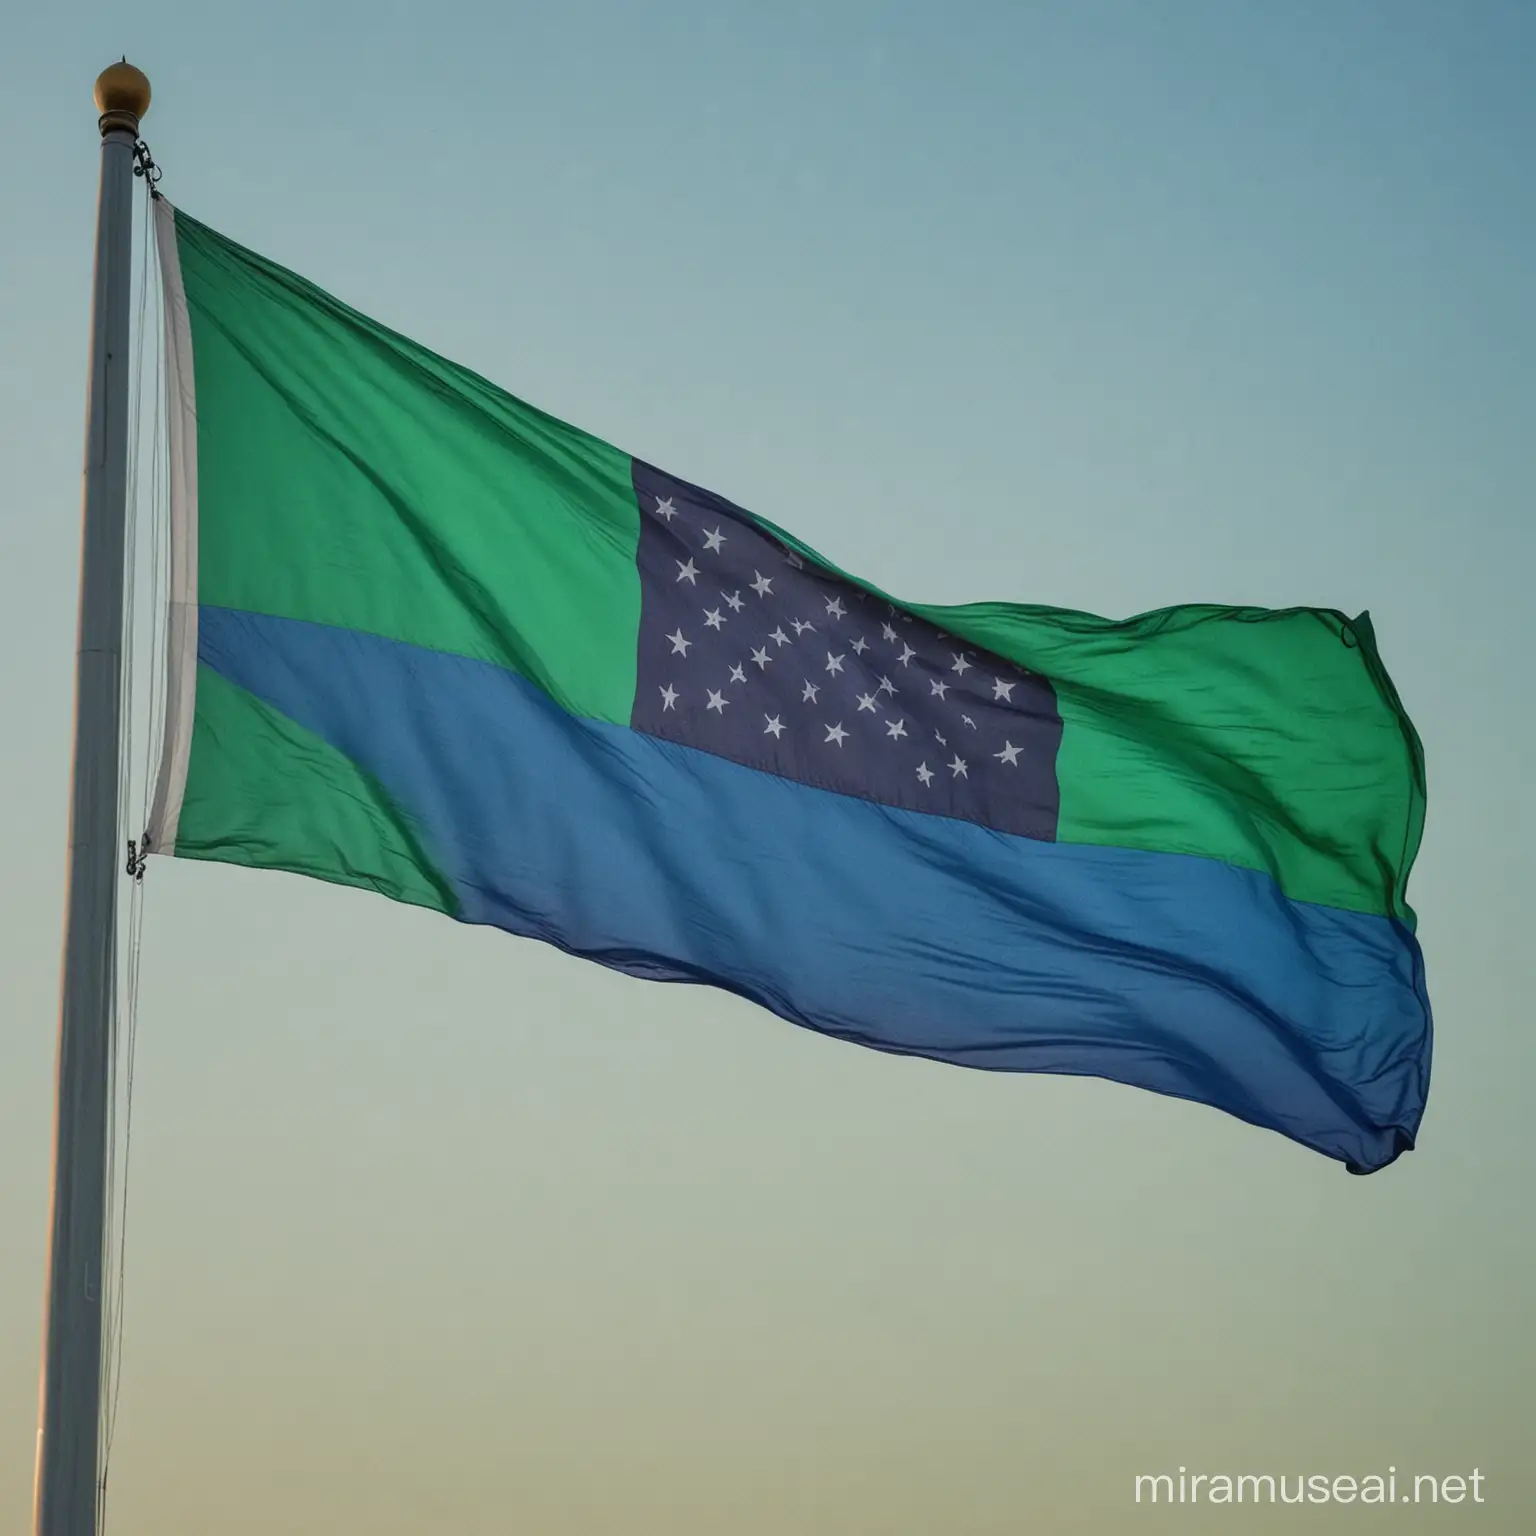 Vibrant Flag with Green and Blue Colors